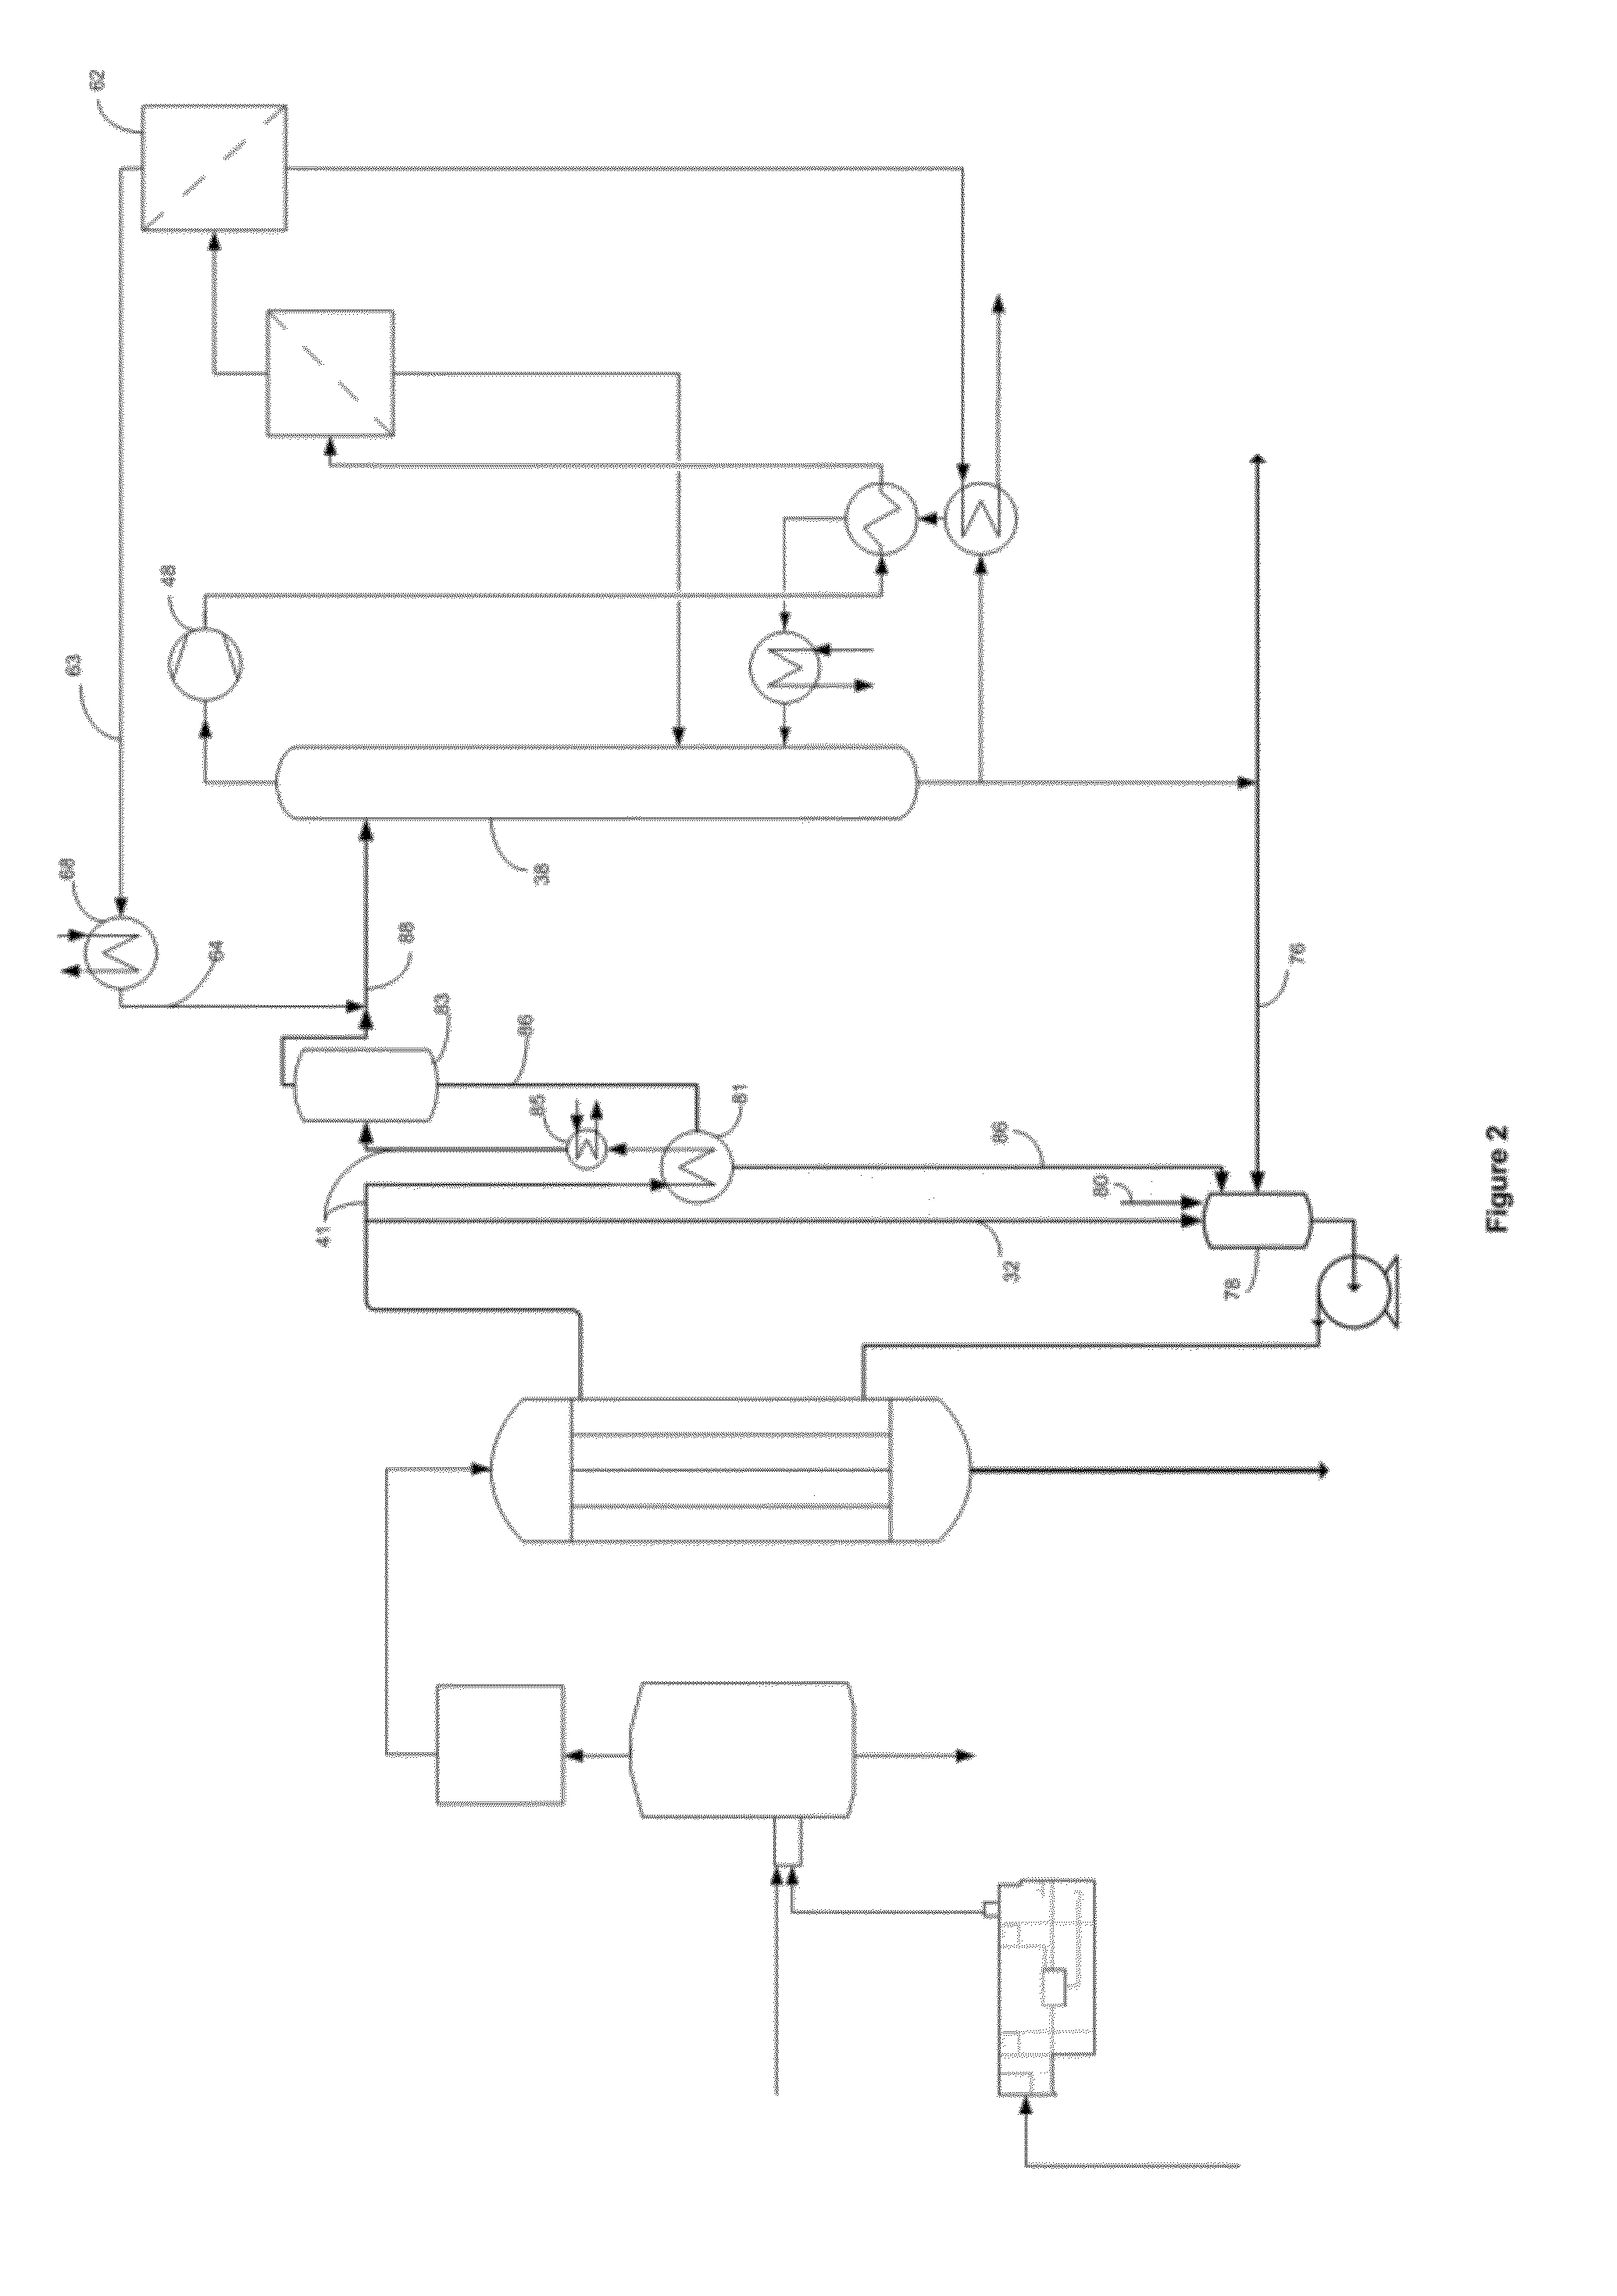 Process for producing ethanol